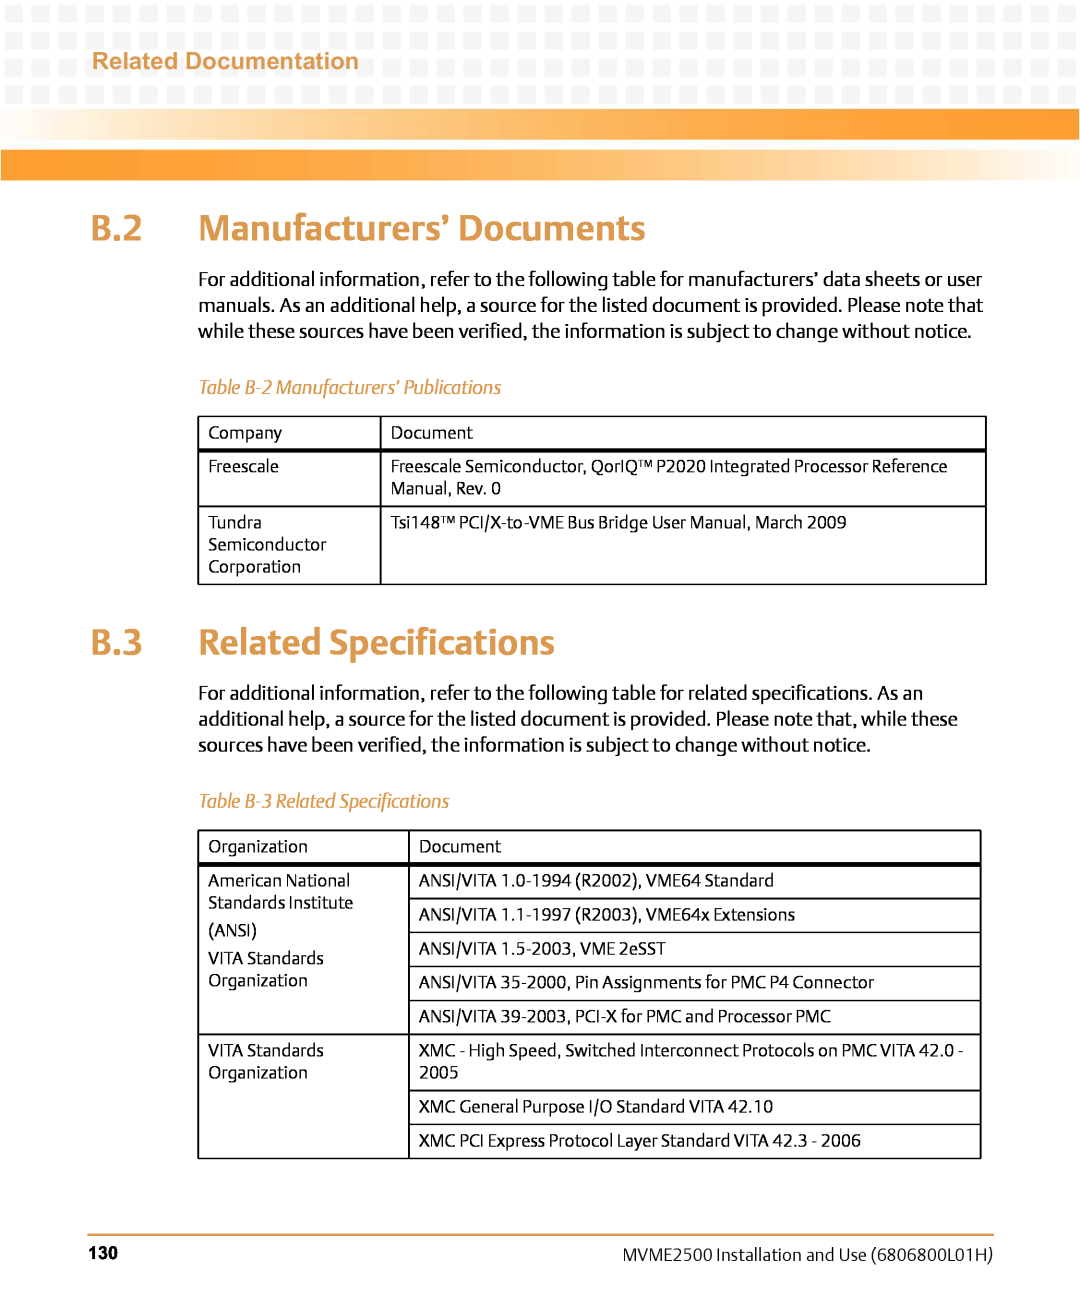 Emerson MVME2500 manual B.2 Manufacturers’ Documents, B.3 Related Specifications, Related Documentation 